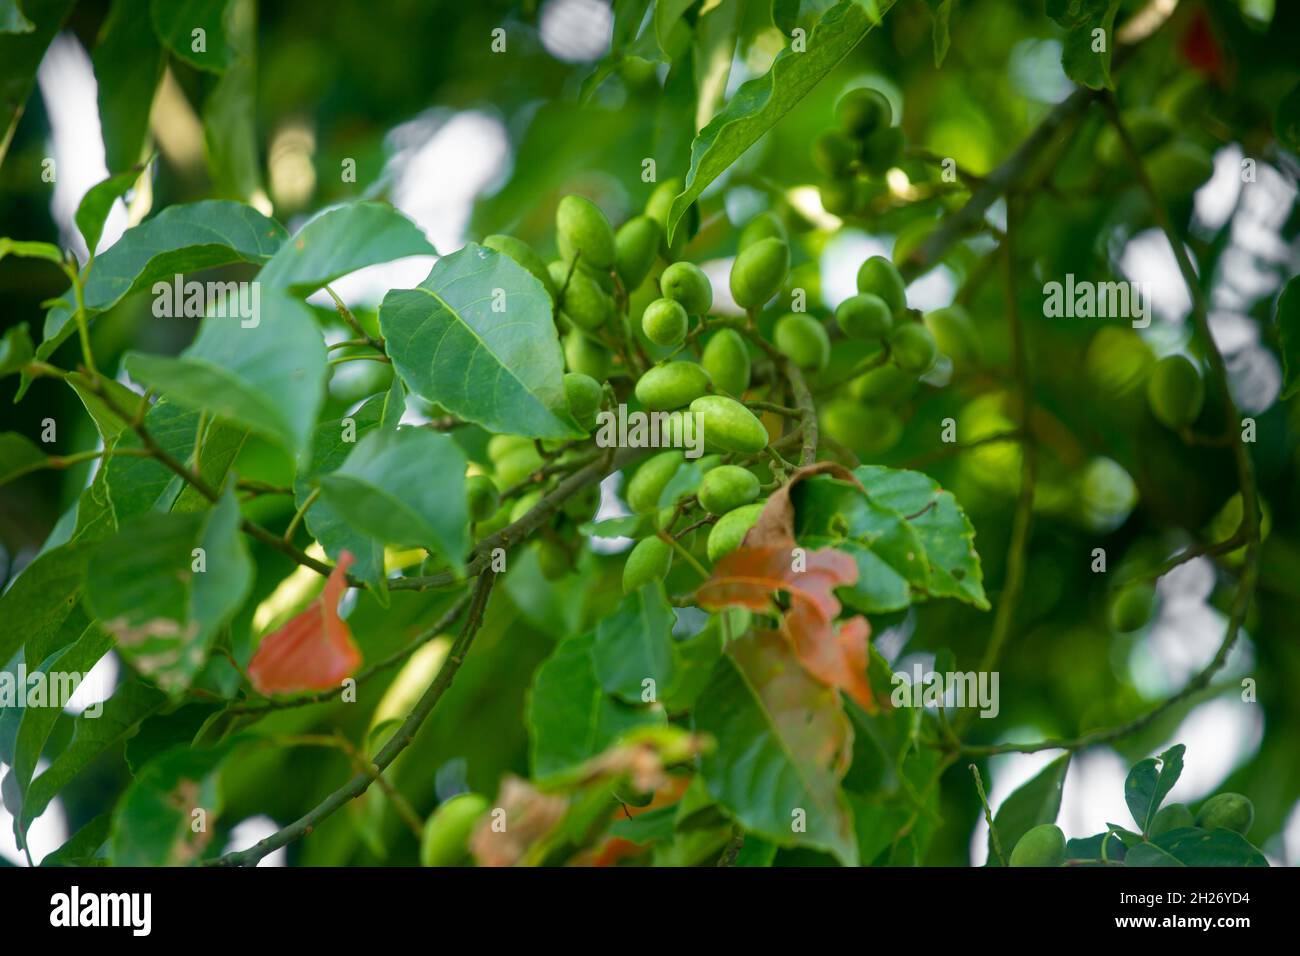 Raw green olives hanging on the tree. Elaeocarpus serratus is a tropical fruit found in Asia. Big Indian olives. Bangladeshi people called Jalpai. Stock Photo